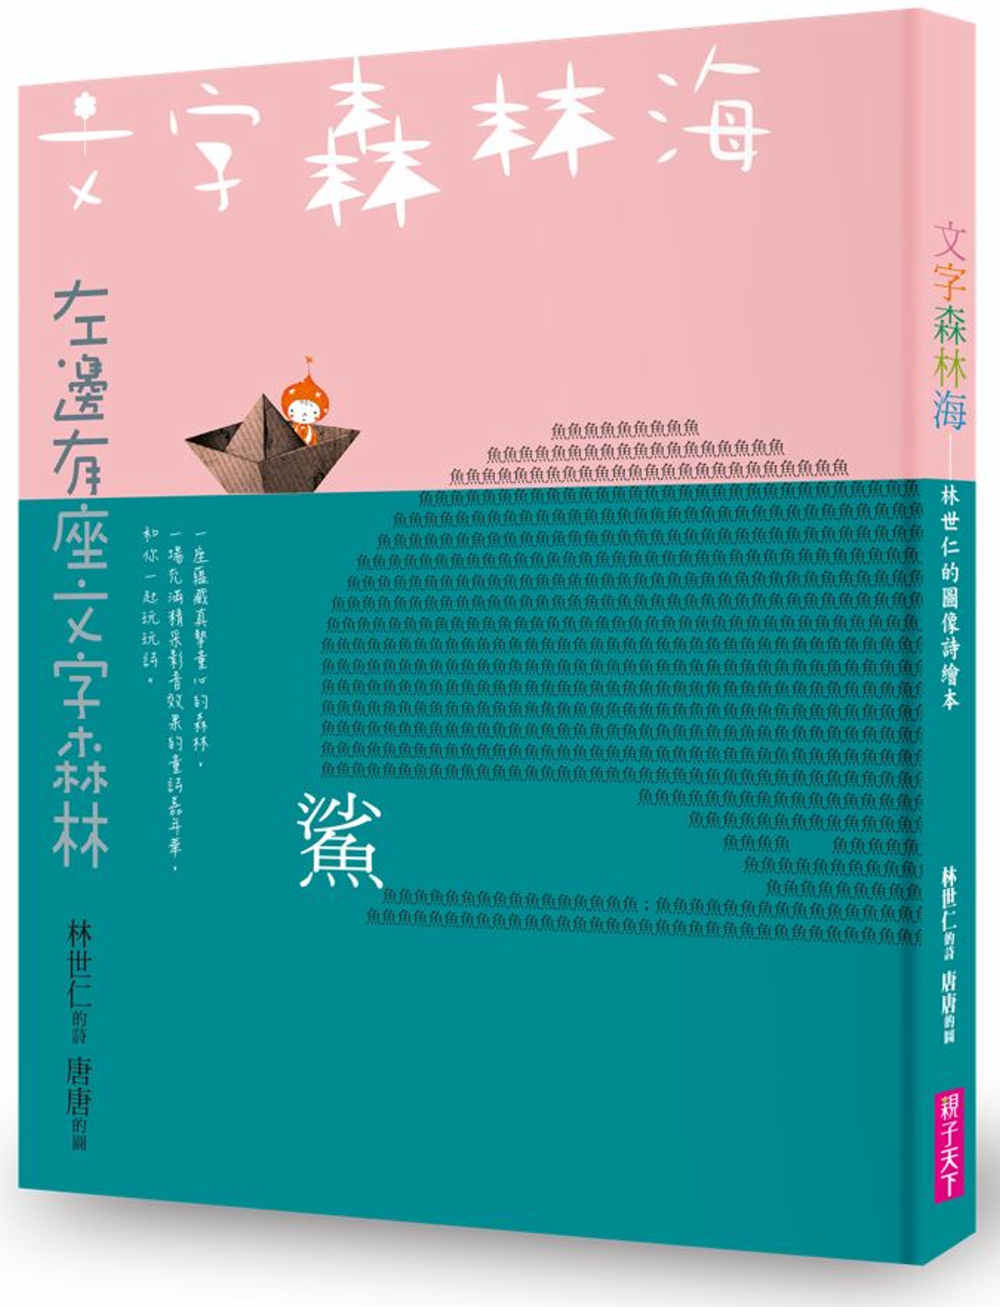 Word Forests and Seas: An Illustrated Collection of Poems • 文字森林海 林世仁的圖像詩繪本